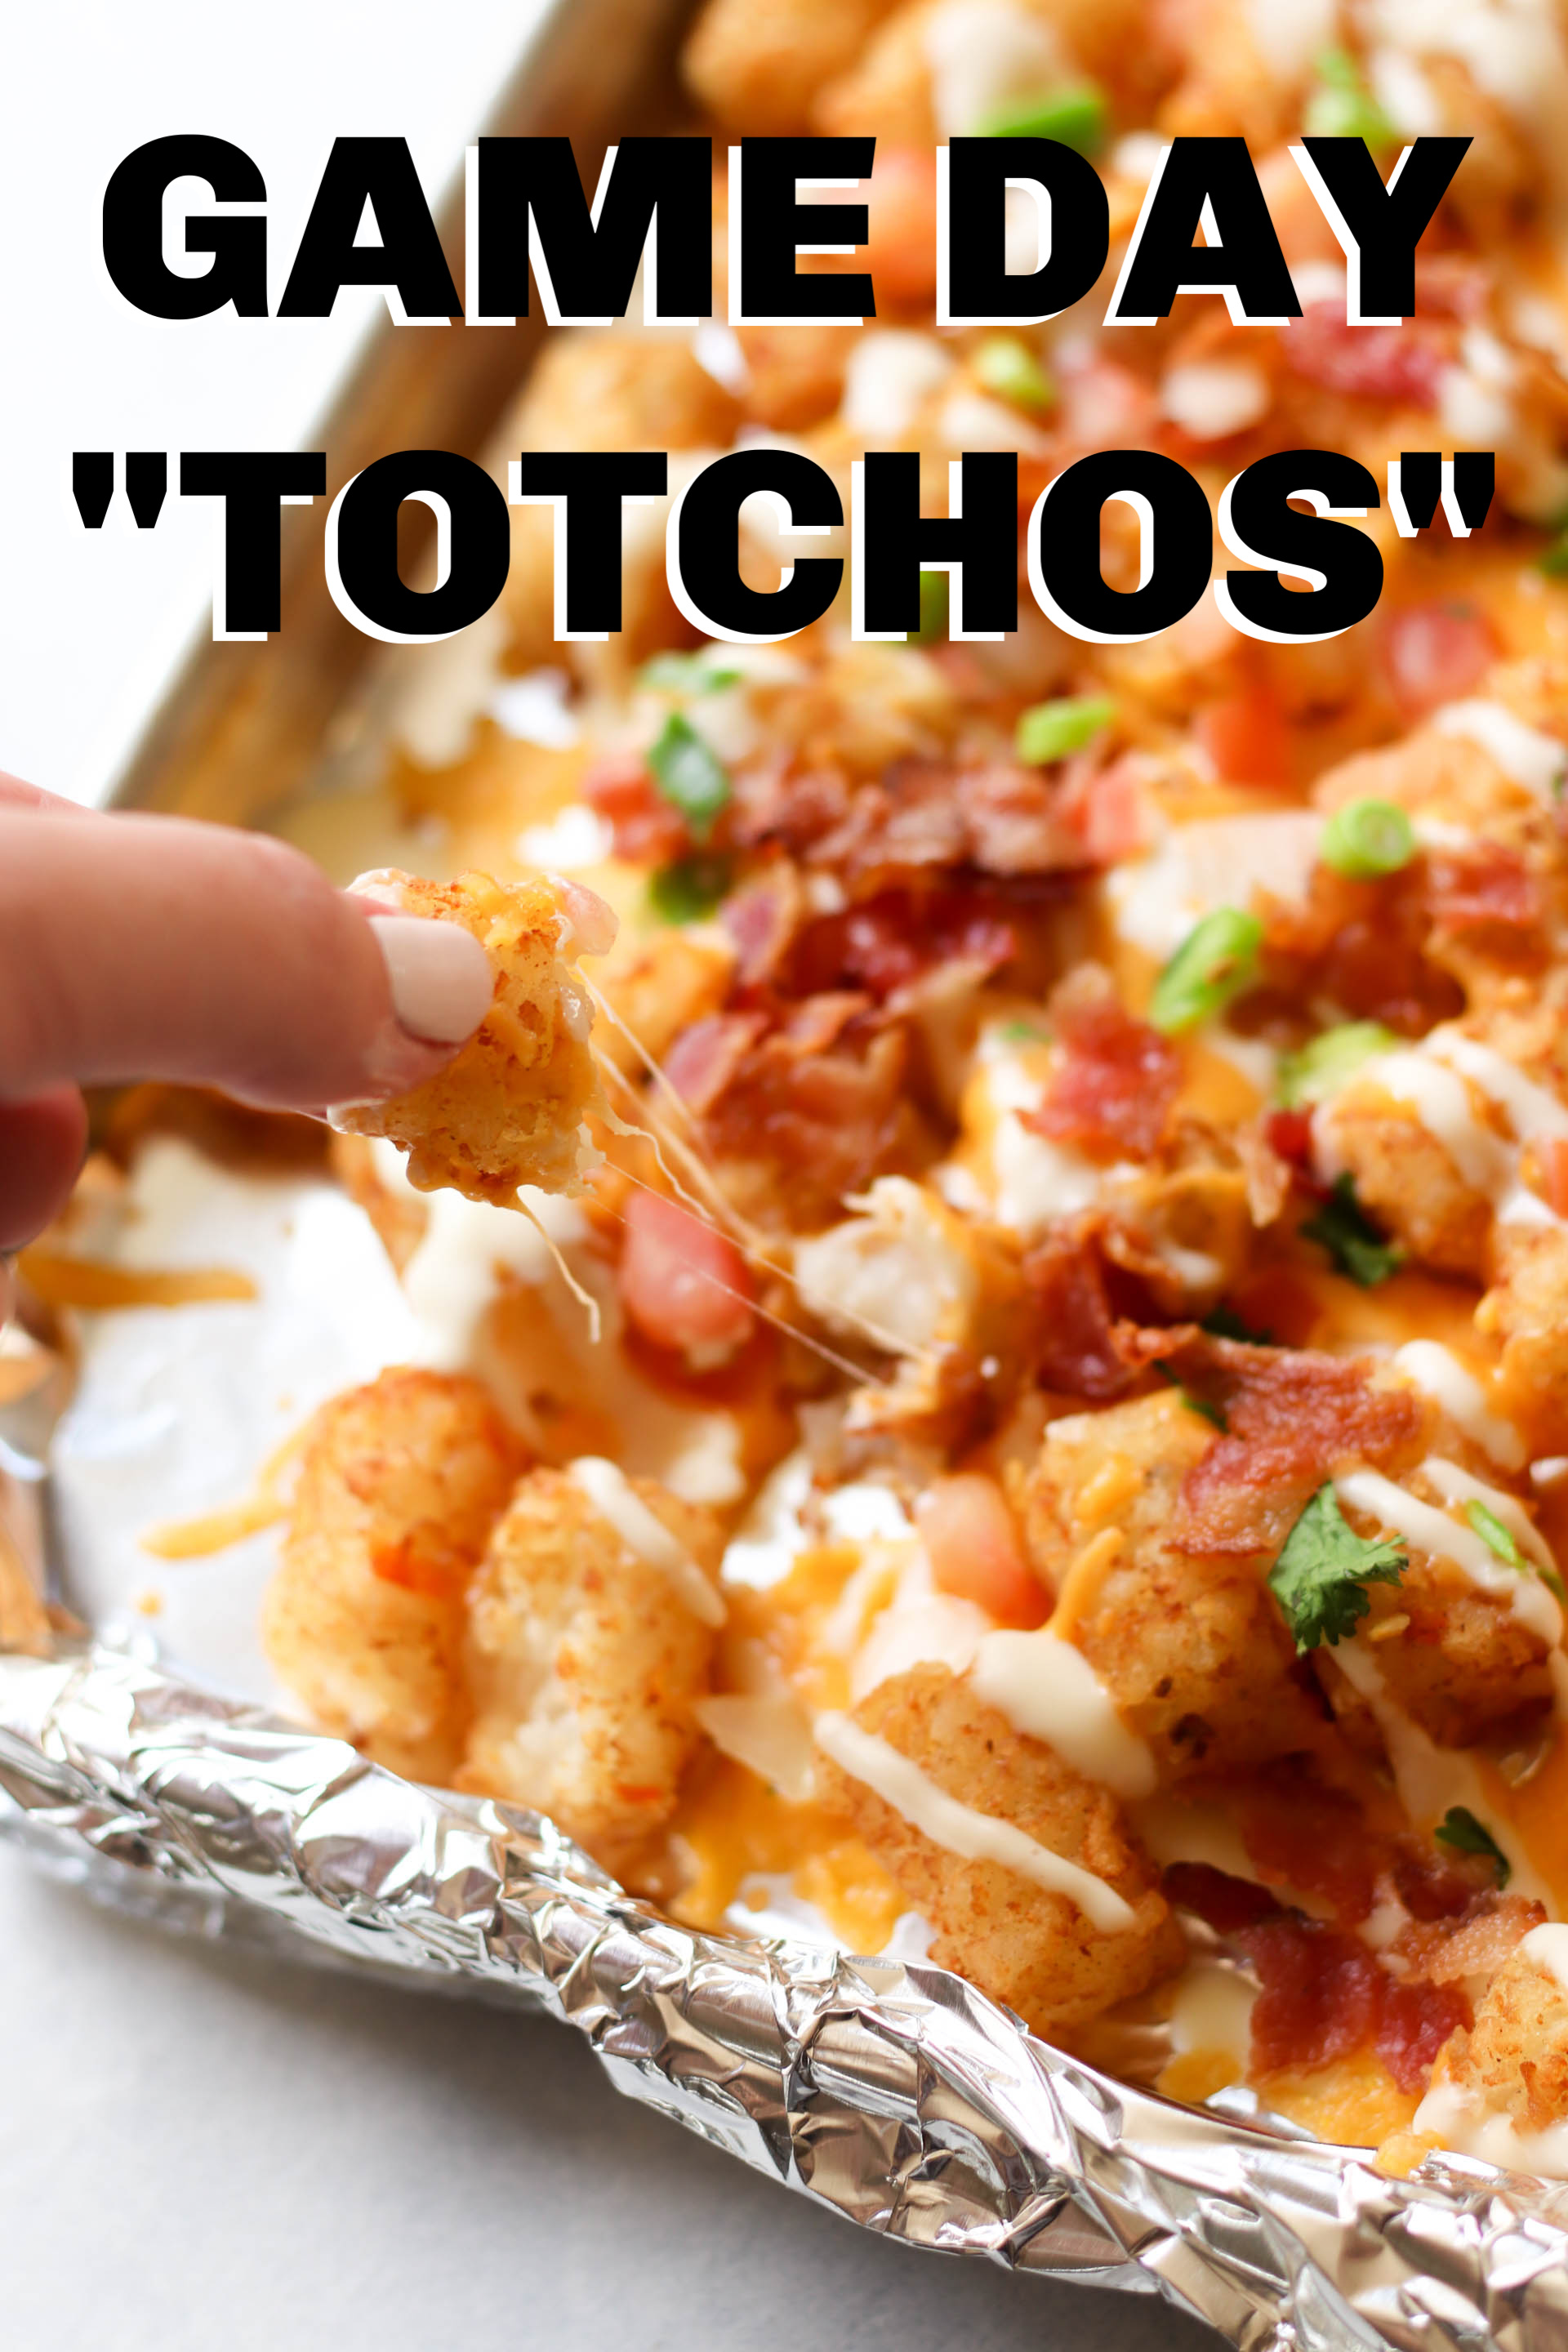 Game Day Totchos